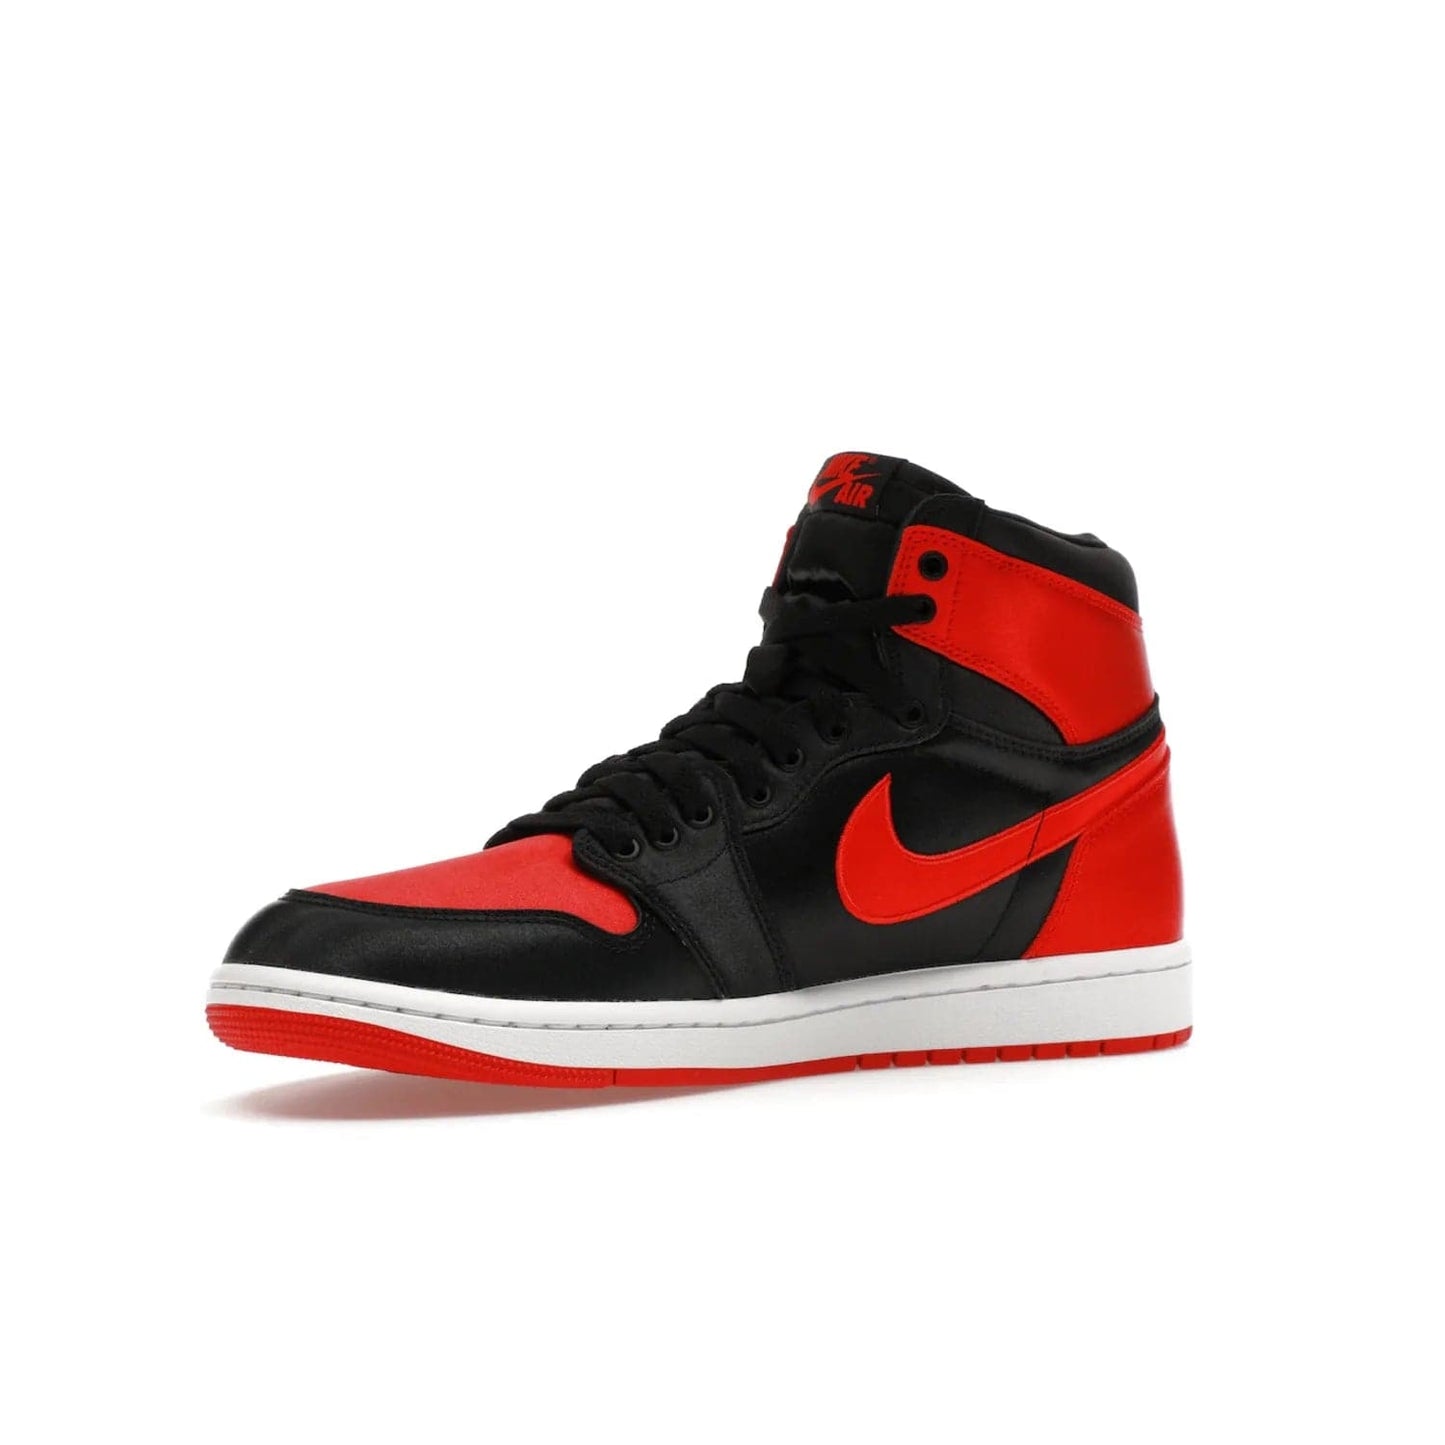 Jordan 1 Retro High OG Satin Bred (Women's) - Image 16 - Only at www.BallersClubKickz.com - Introducing the Jordan 1 Retro High OG Satin Bred (Women's). Luxe satin finish, contrasting hues & classic accents. Trending sneakers symbolizing timelessness & heritage. Make a bold statement with this iconic shoe. Available October 4, 2023.